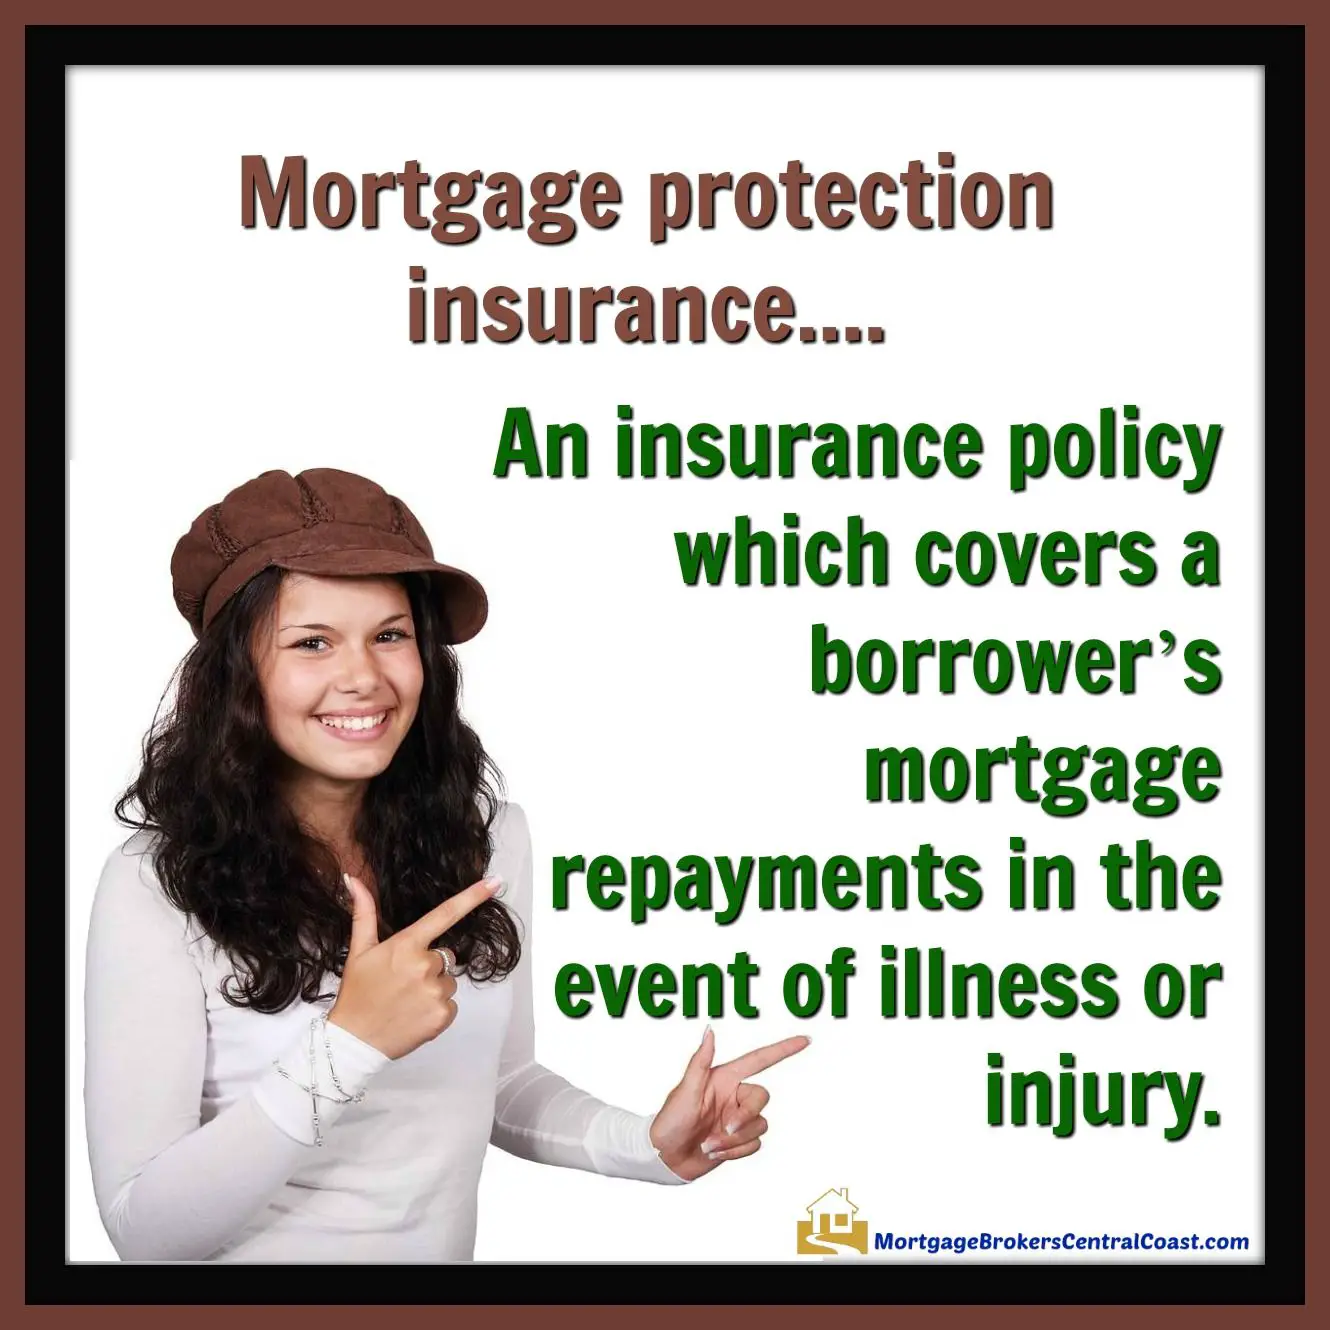 Does Mortgage Protection Insurance Cover Death